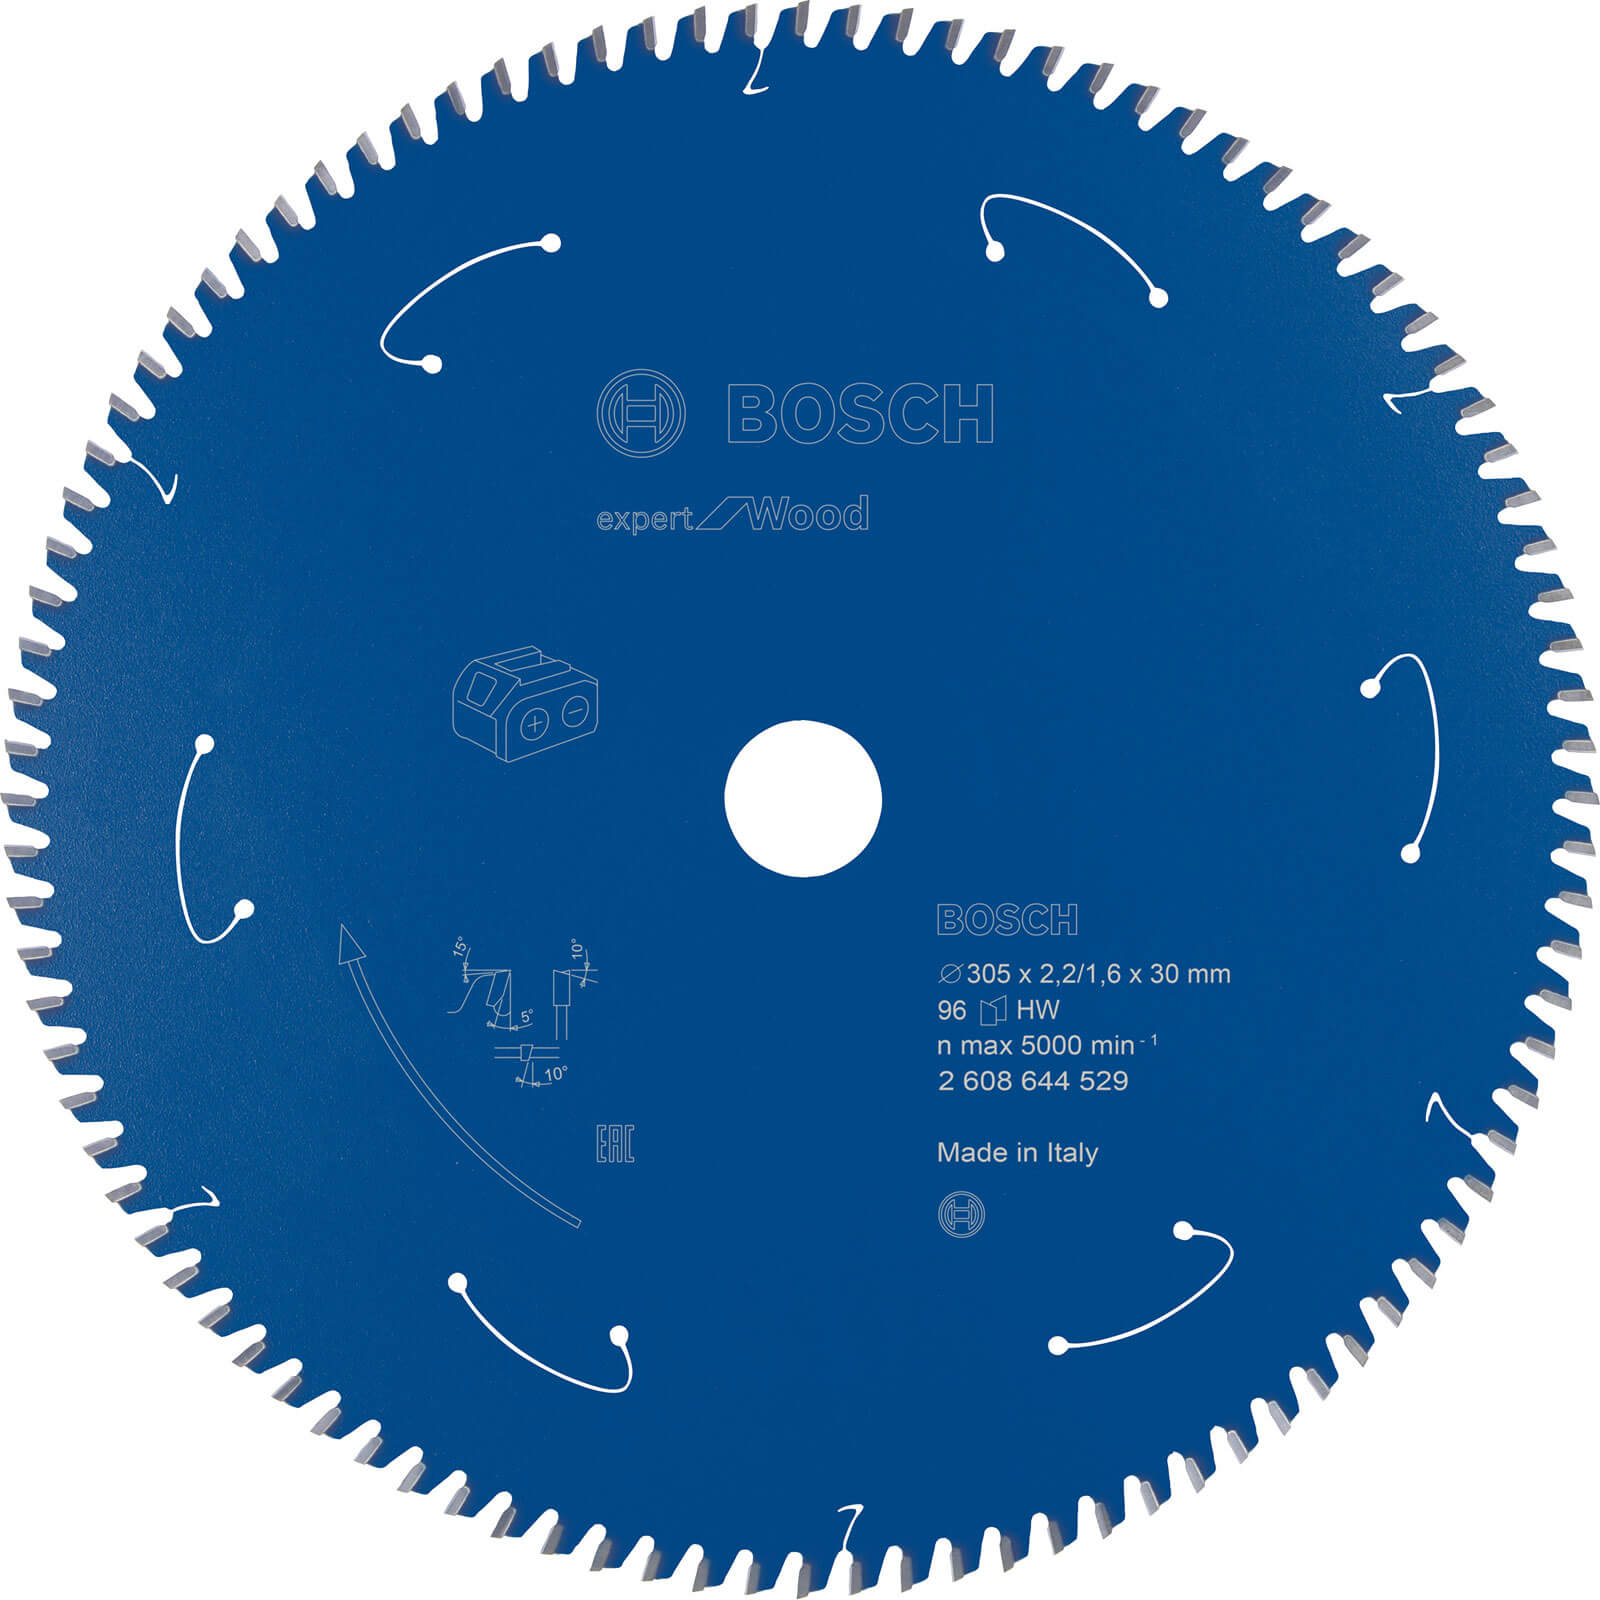 Image of Bosch Expert Wood Cutting Cordless Mitre Saw Blade 305mm 96T 30mm